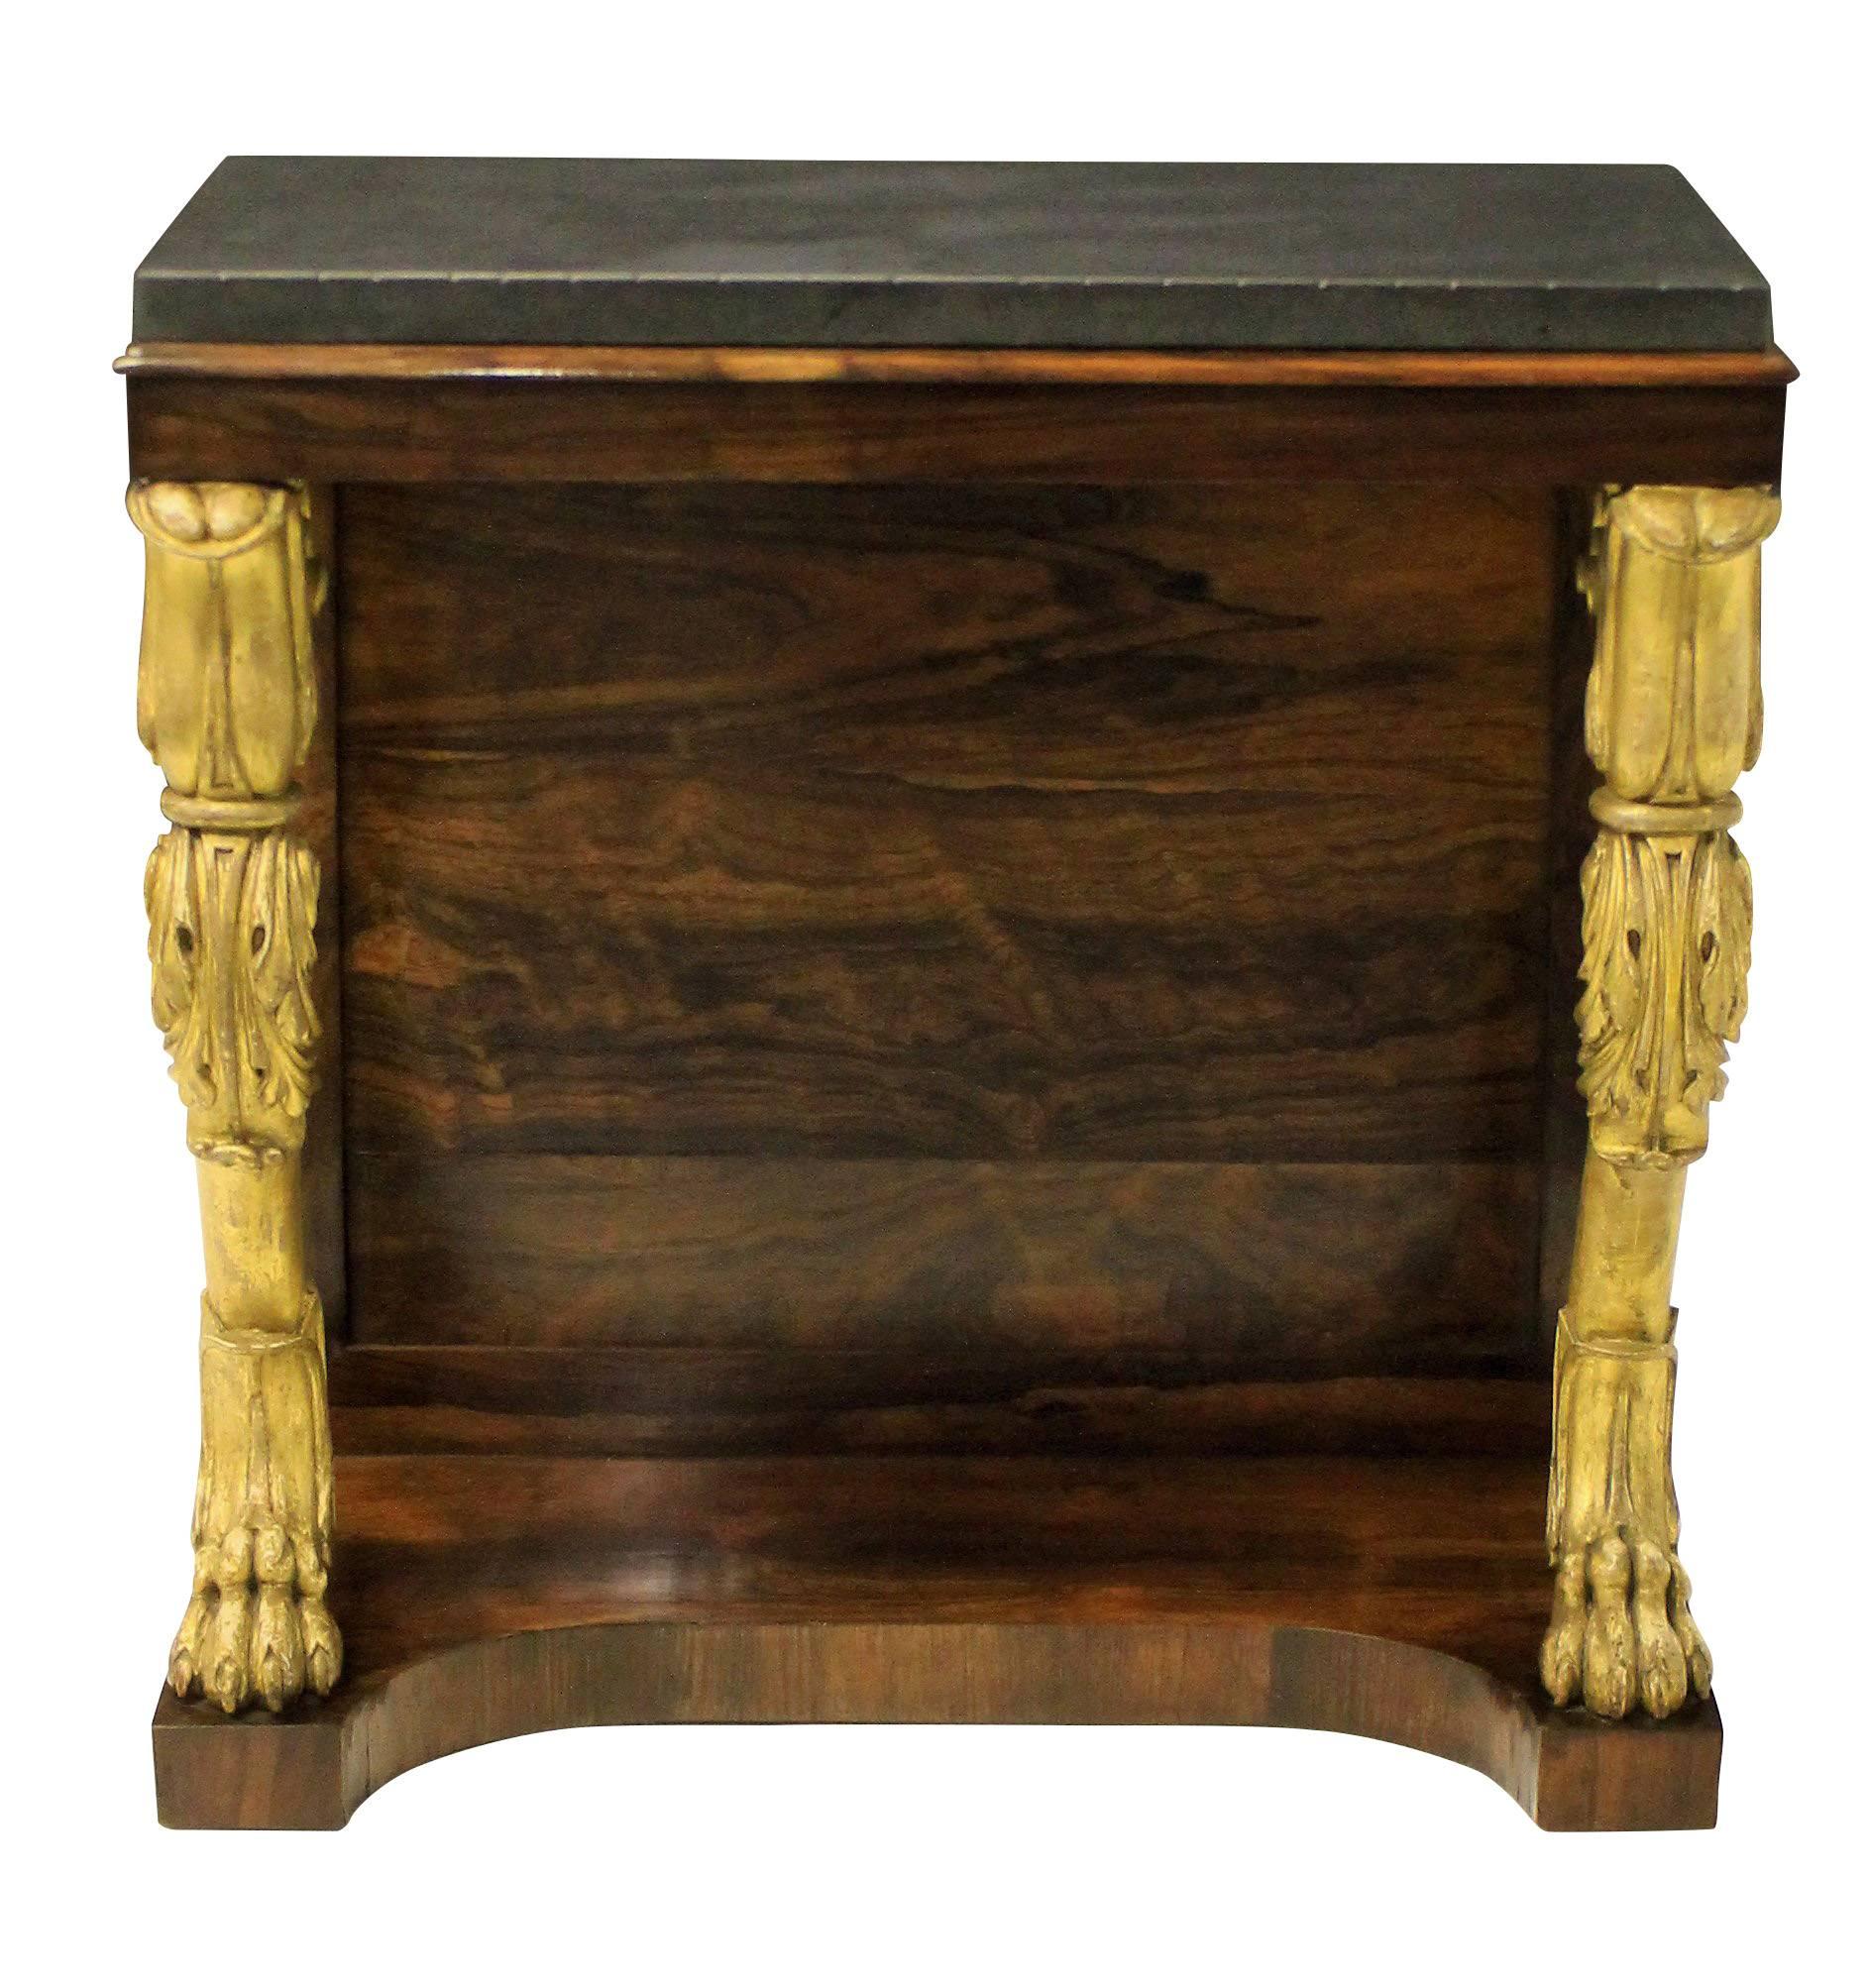 An English Regency console table in rosewood, with two carved and water gilded monopodia legs. The top of Belgian marble.

